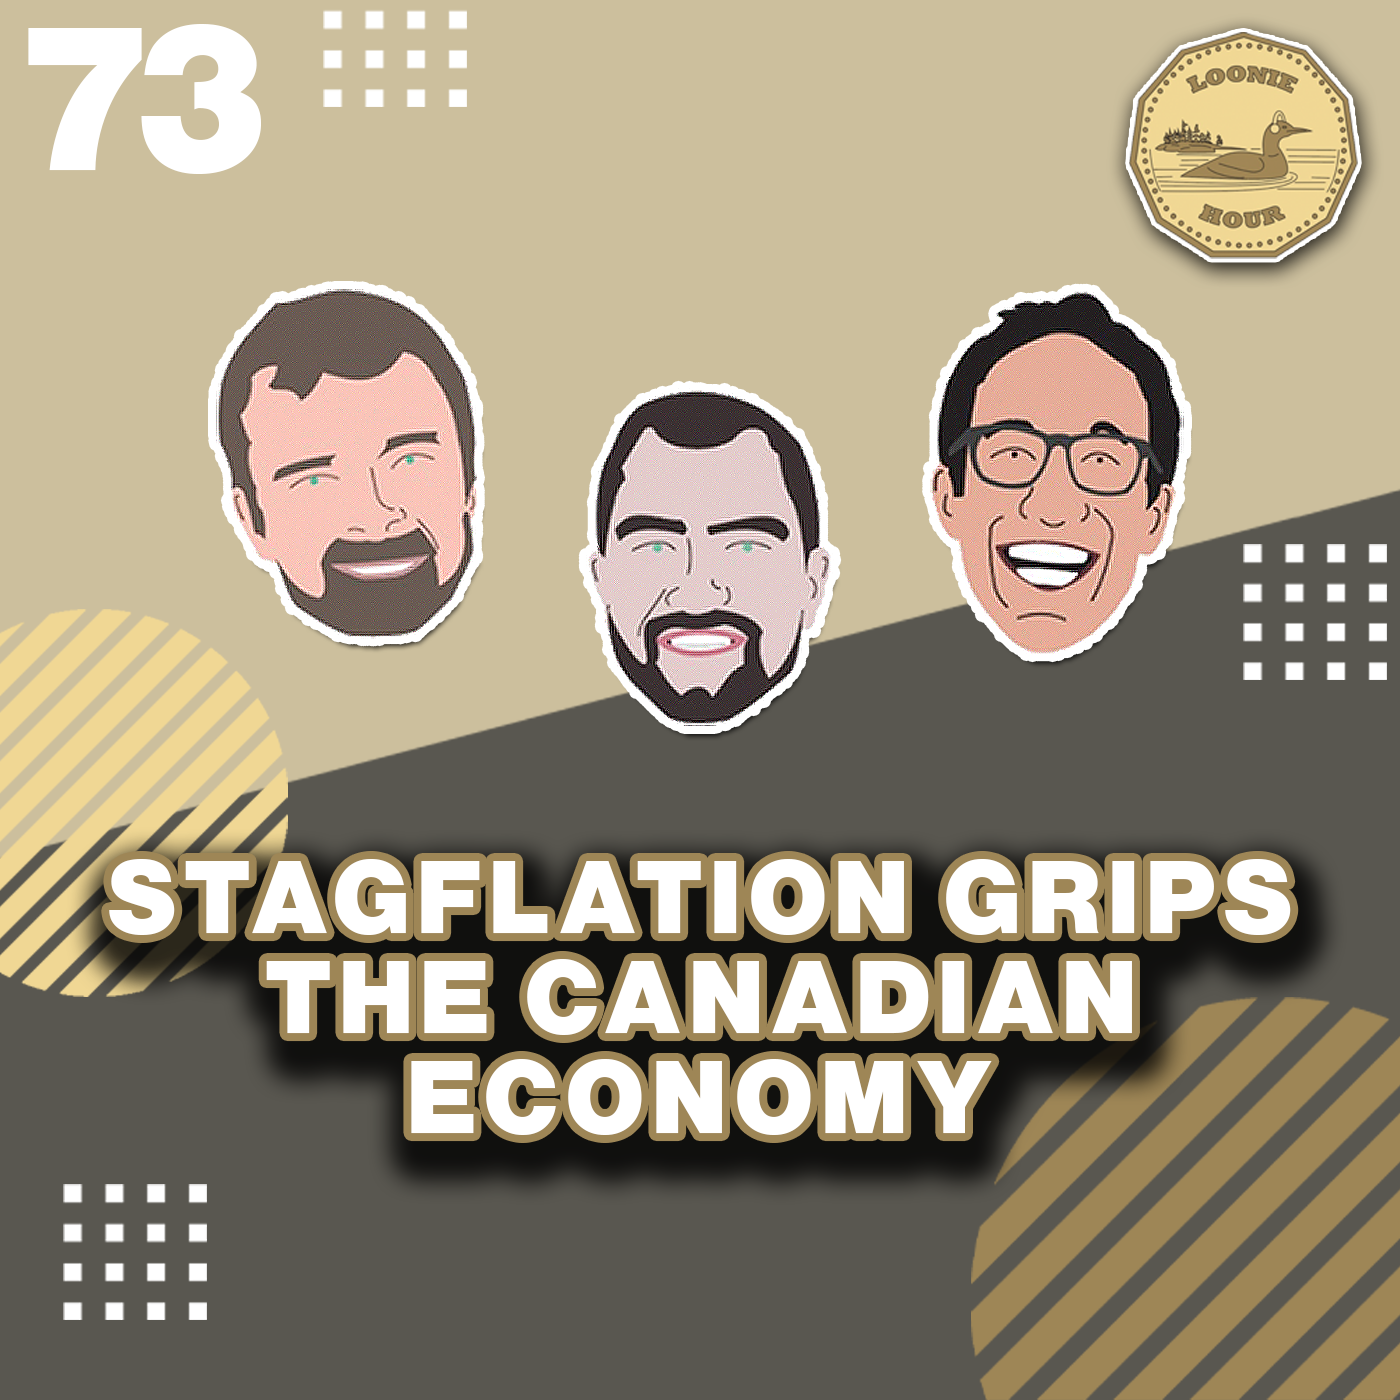 Stagflation Grips the Canadian Economy